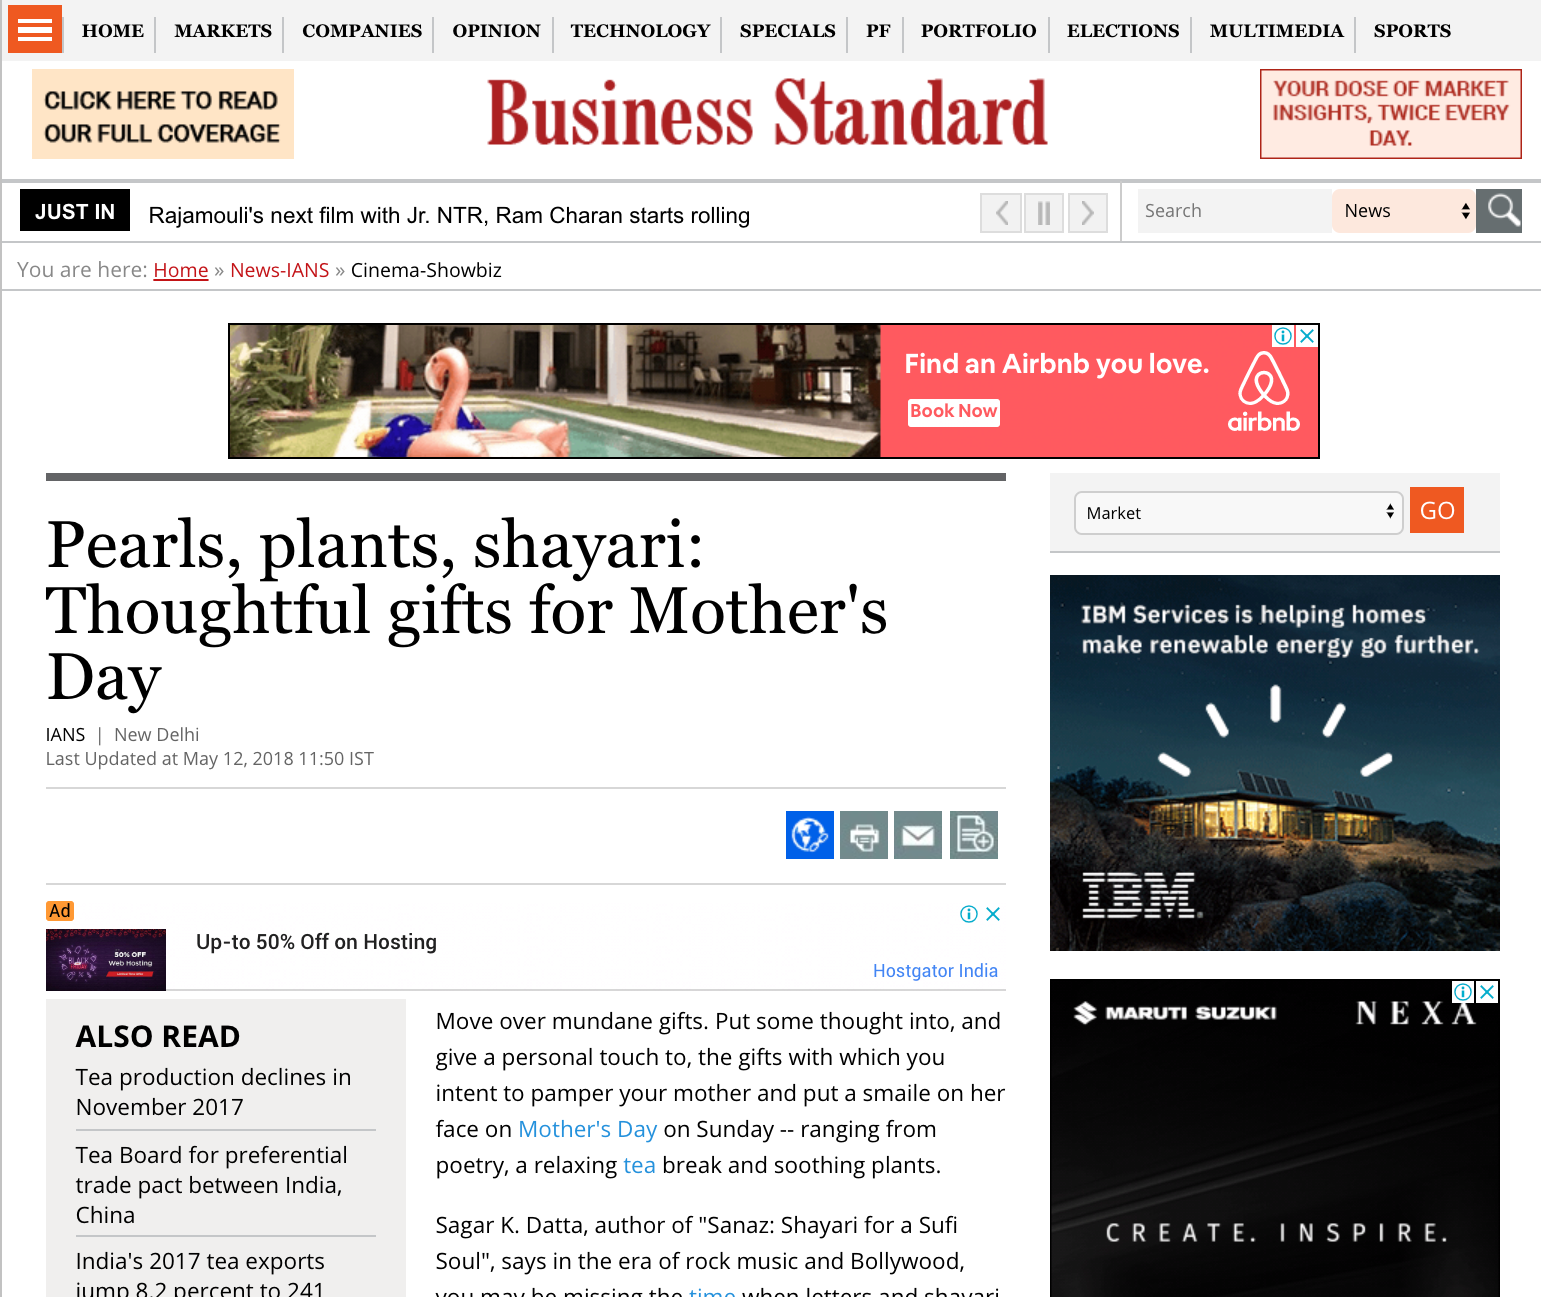 Business Standard | Pearls, plants, shayari: Thoughtful gifts for Mother's Day